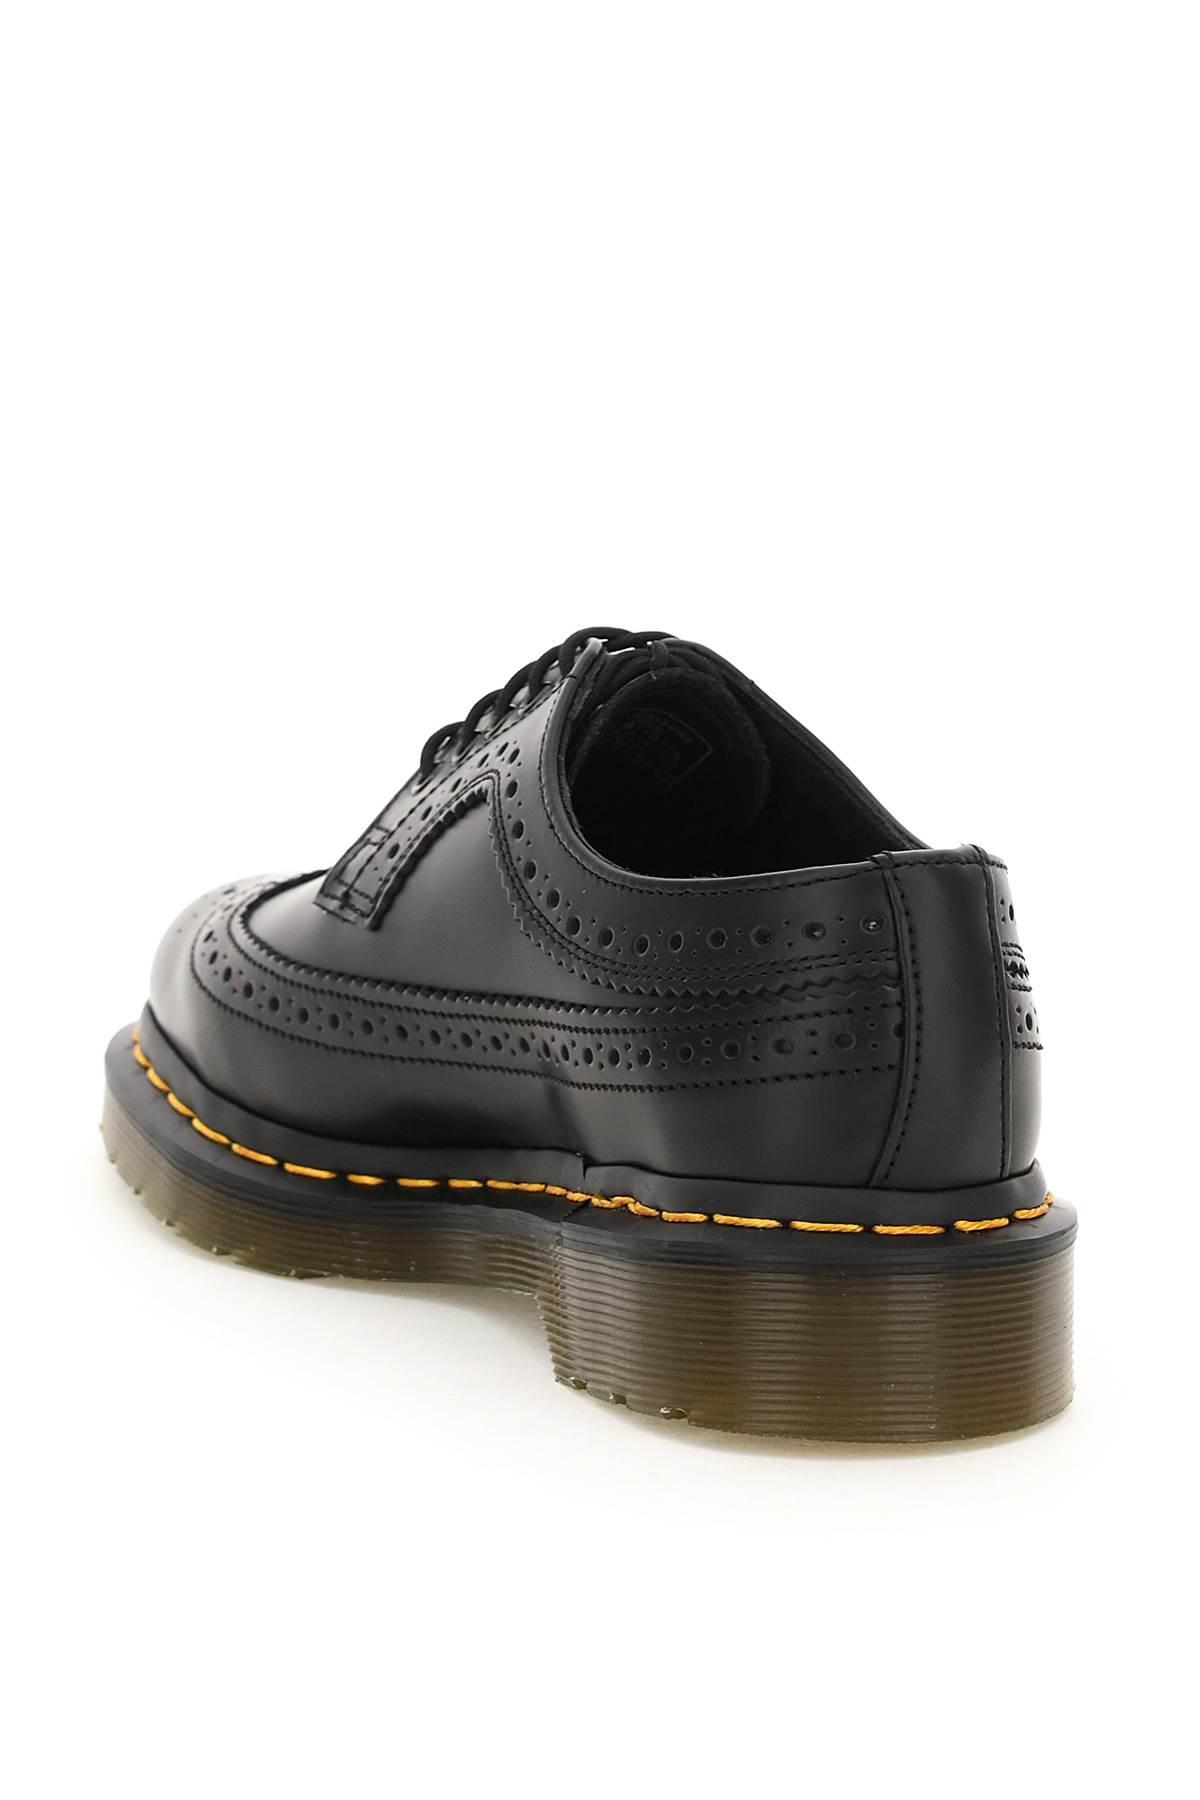 Dr. Martens Leather 3989 Lace-up Shoes in Nero (Black) for Men - Save 9% |  Lyst